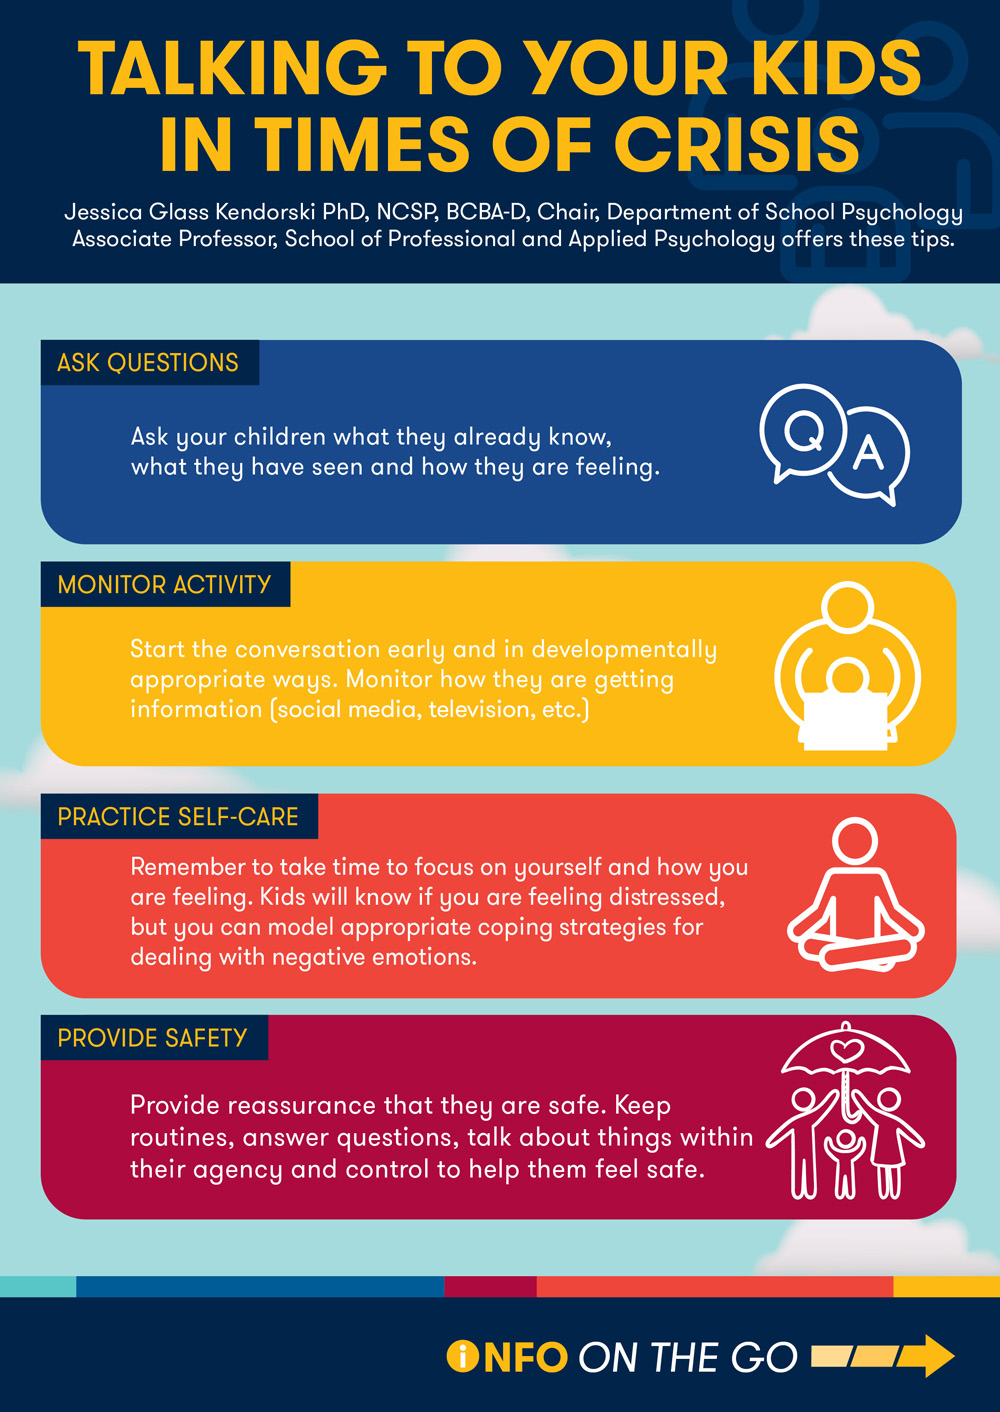 Infographic showing text and icons related to tips for managing childhood stress